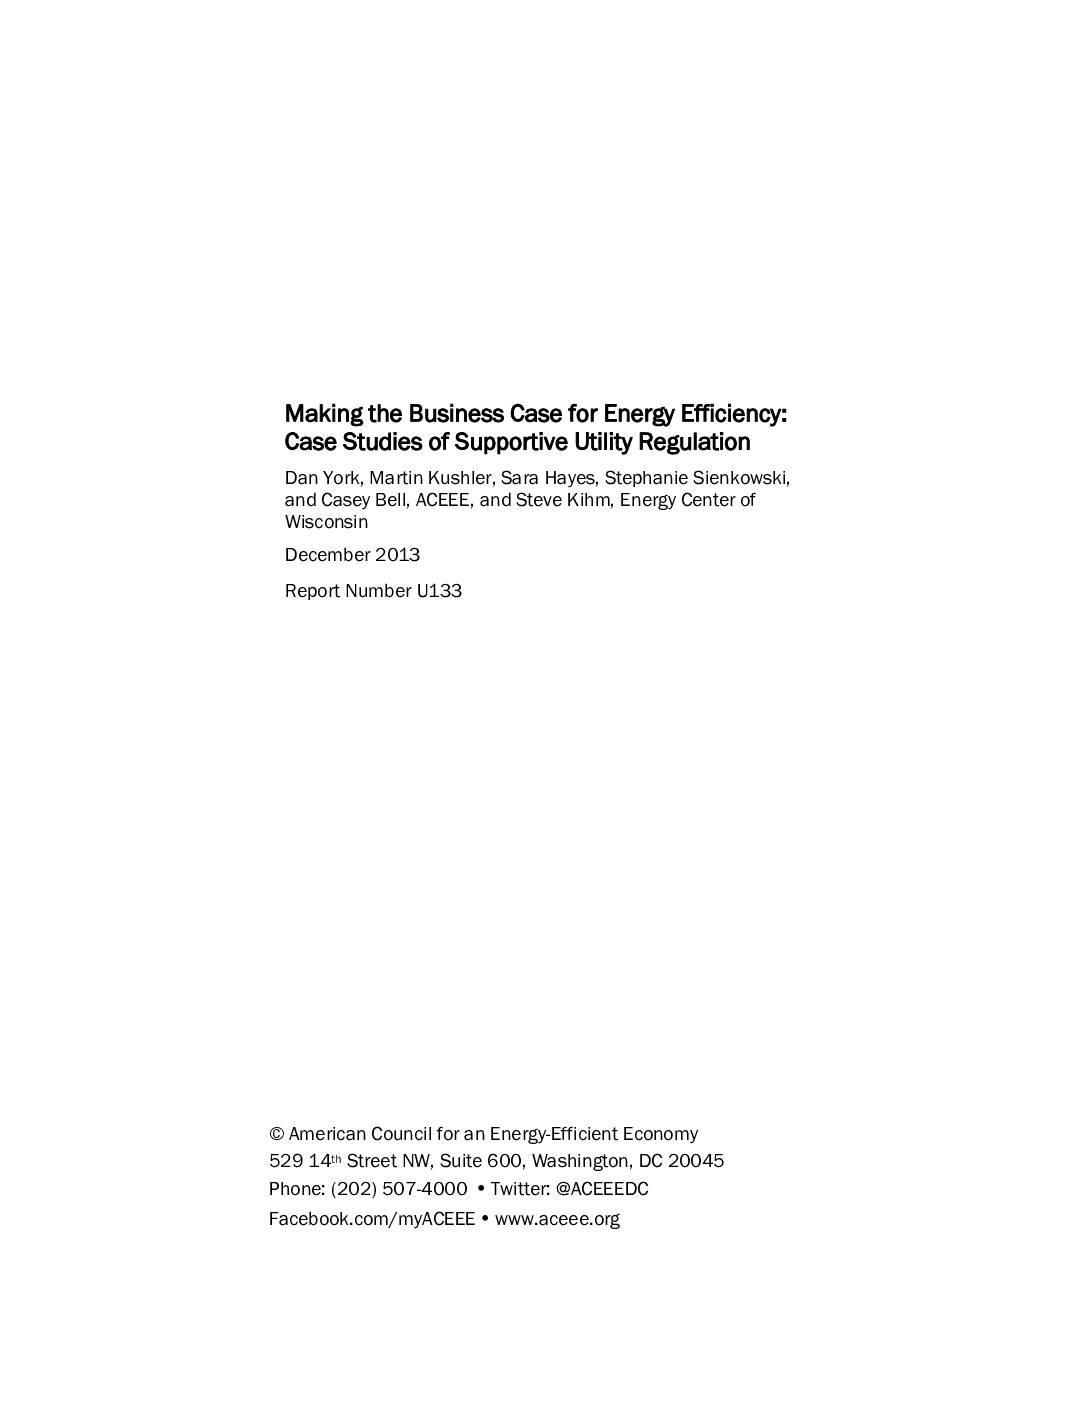 Making the Business Case for Energy Efficiency: Case Studies of Supportive Utility Regulation